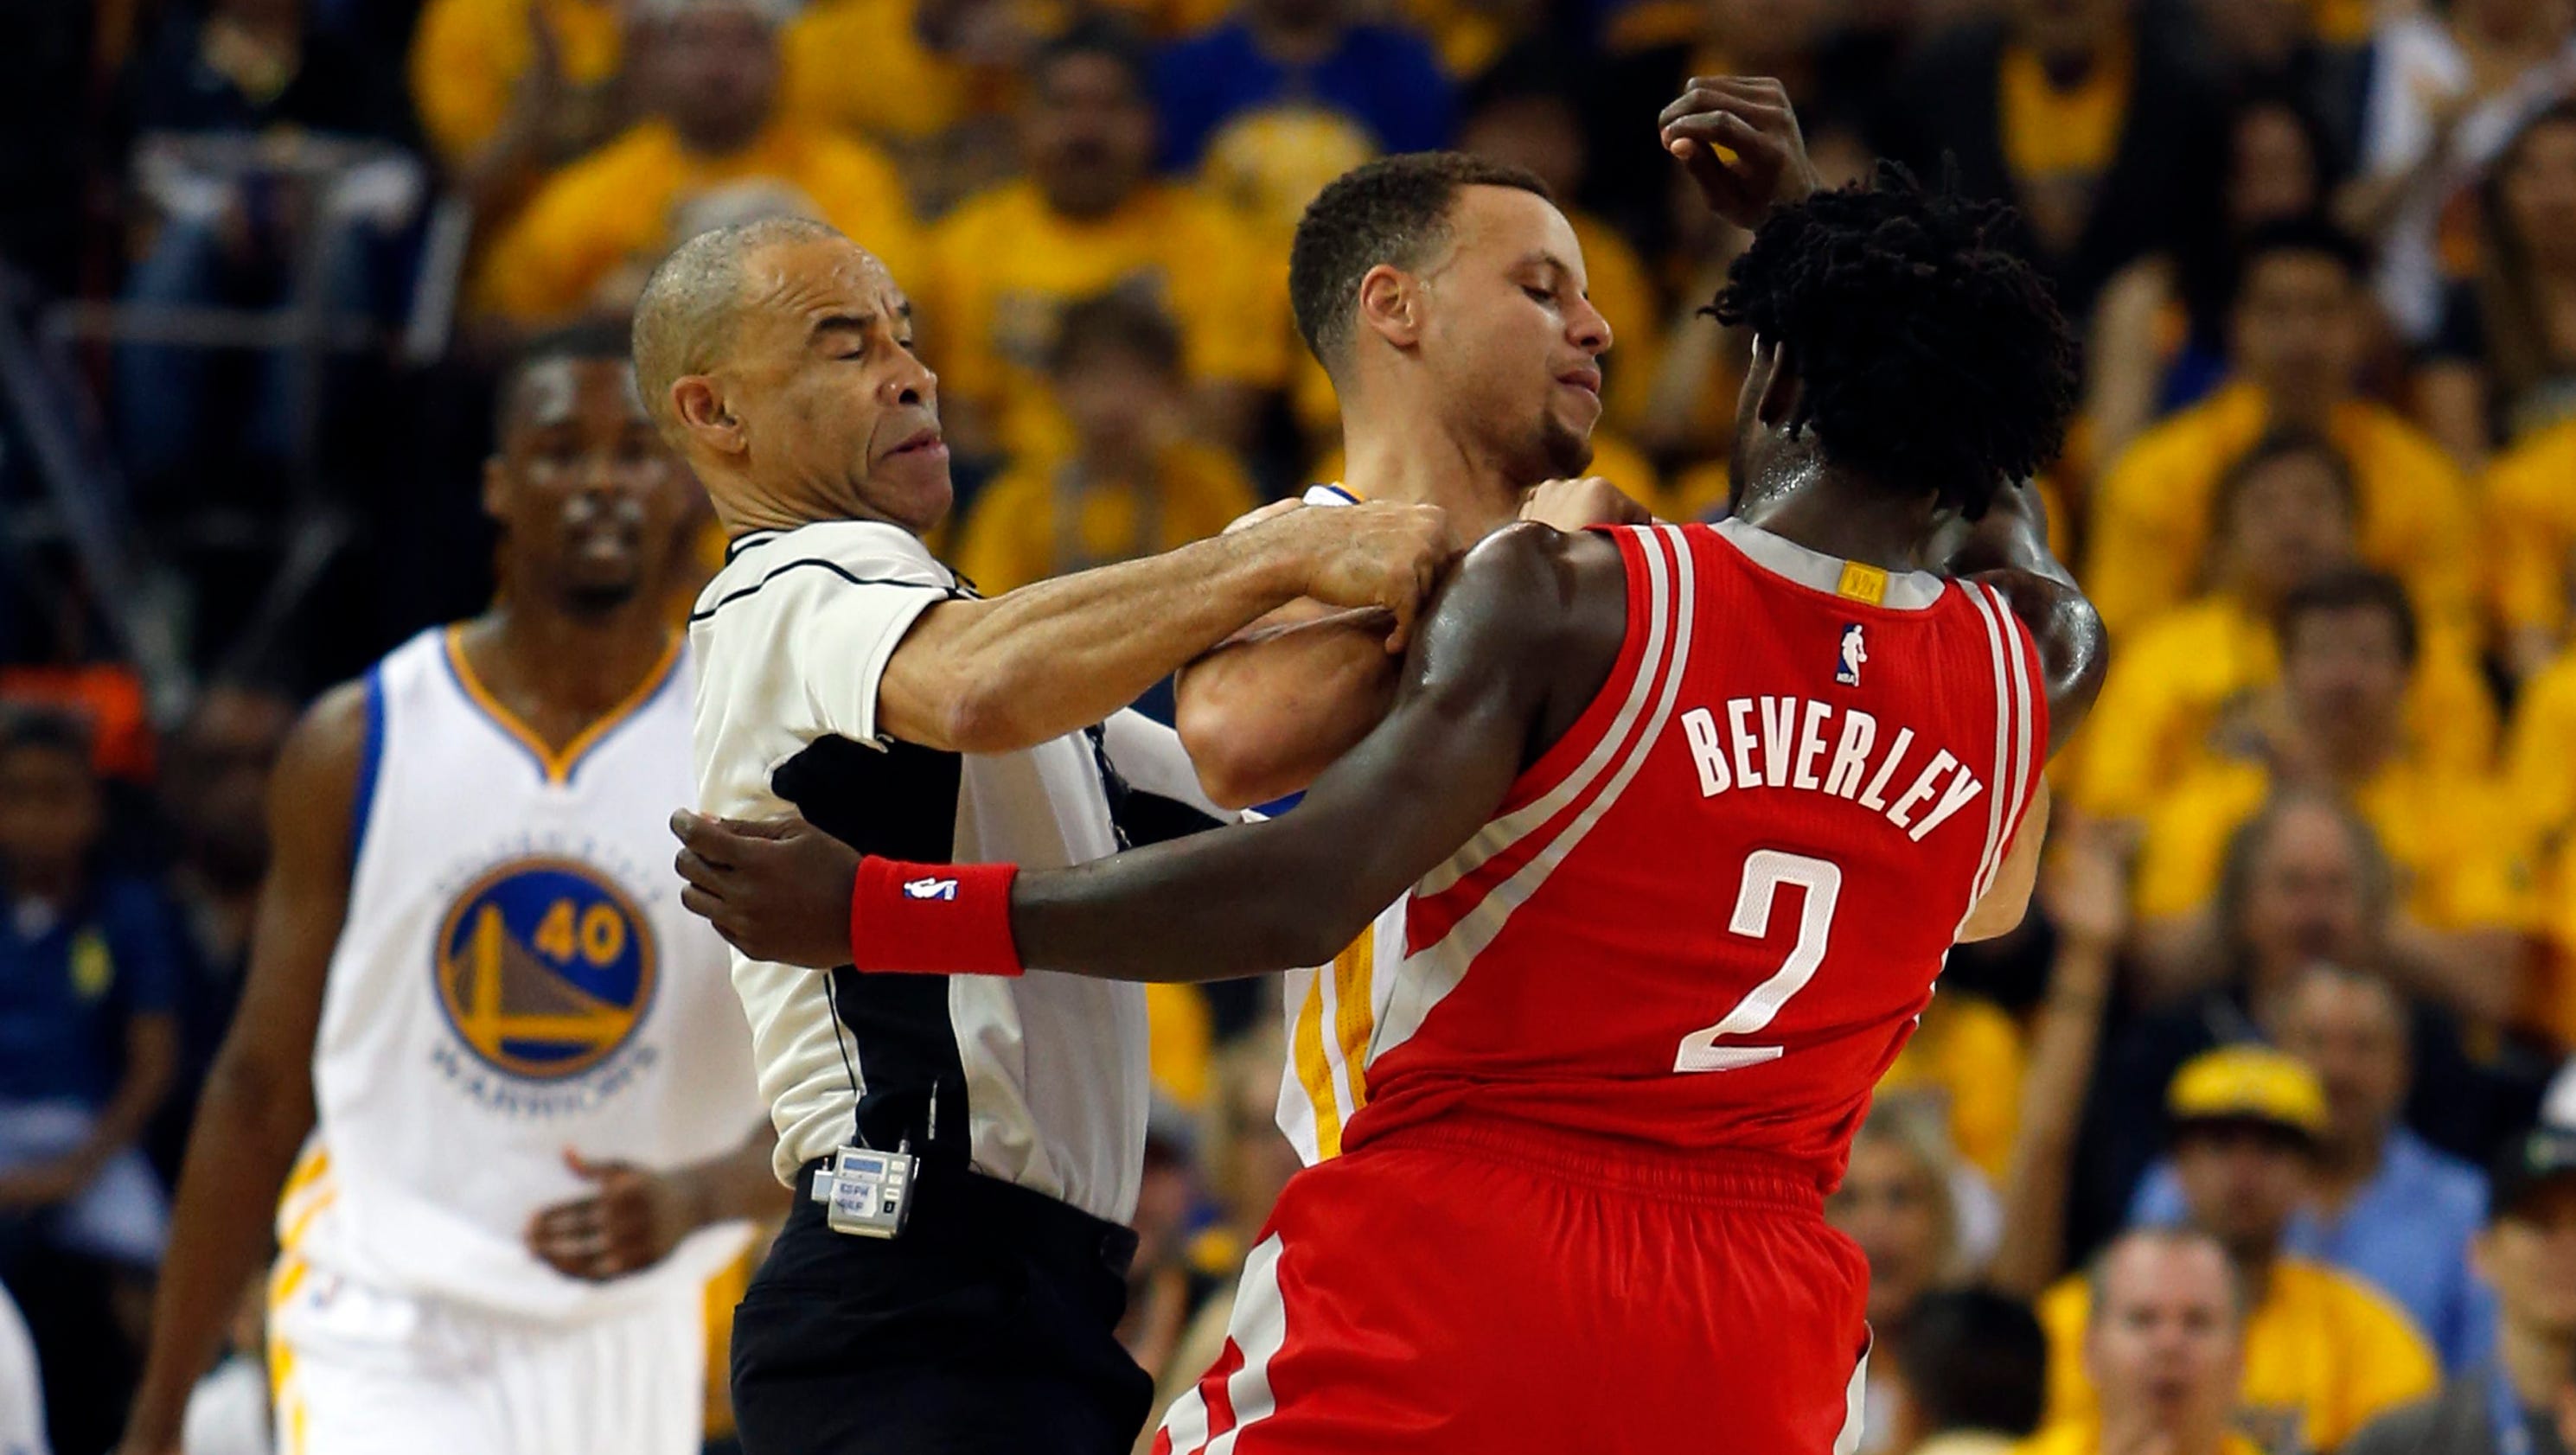 Patrick Beverley's play dirty? Warriors have mixed reactions3200 x 1680